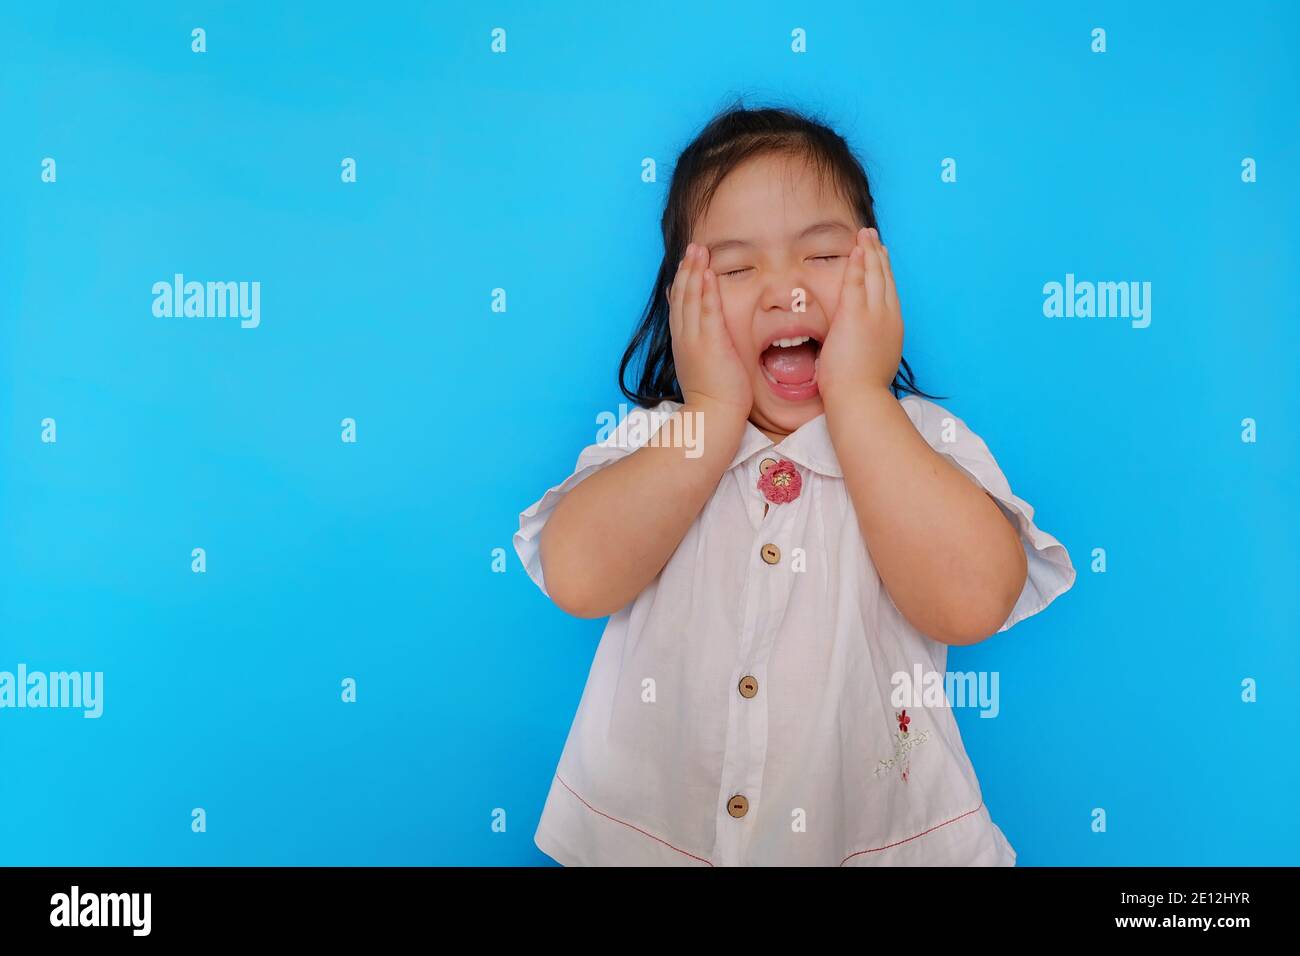 A portrait of a cute Asian girl feeling excited, screaming with her eyes closed and the hands covering her cheek with plain light blue background. Stock Photo